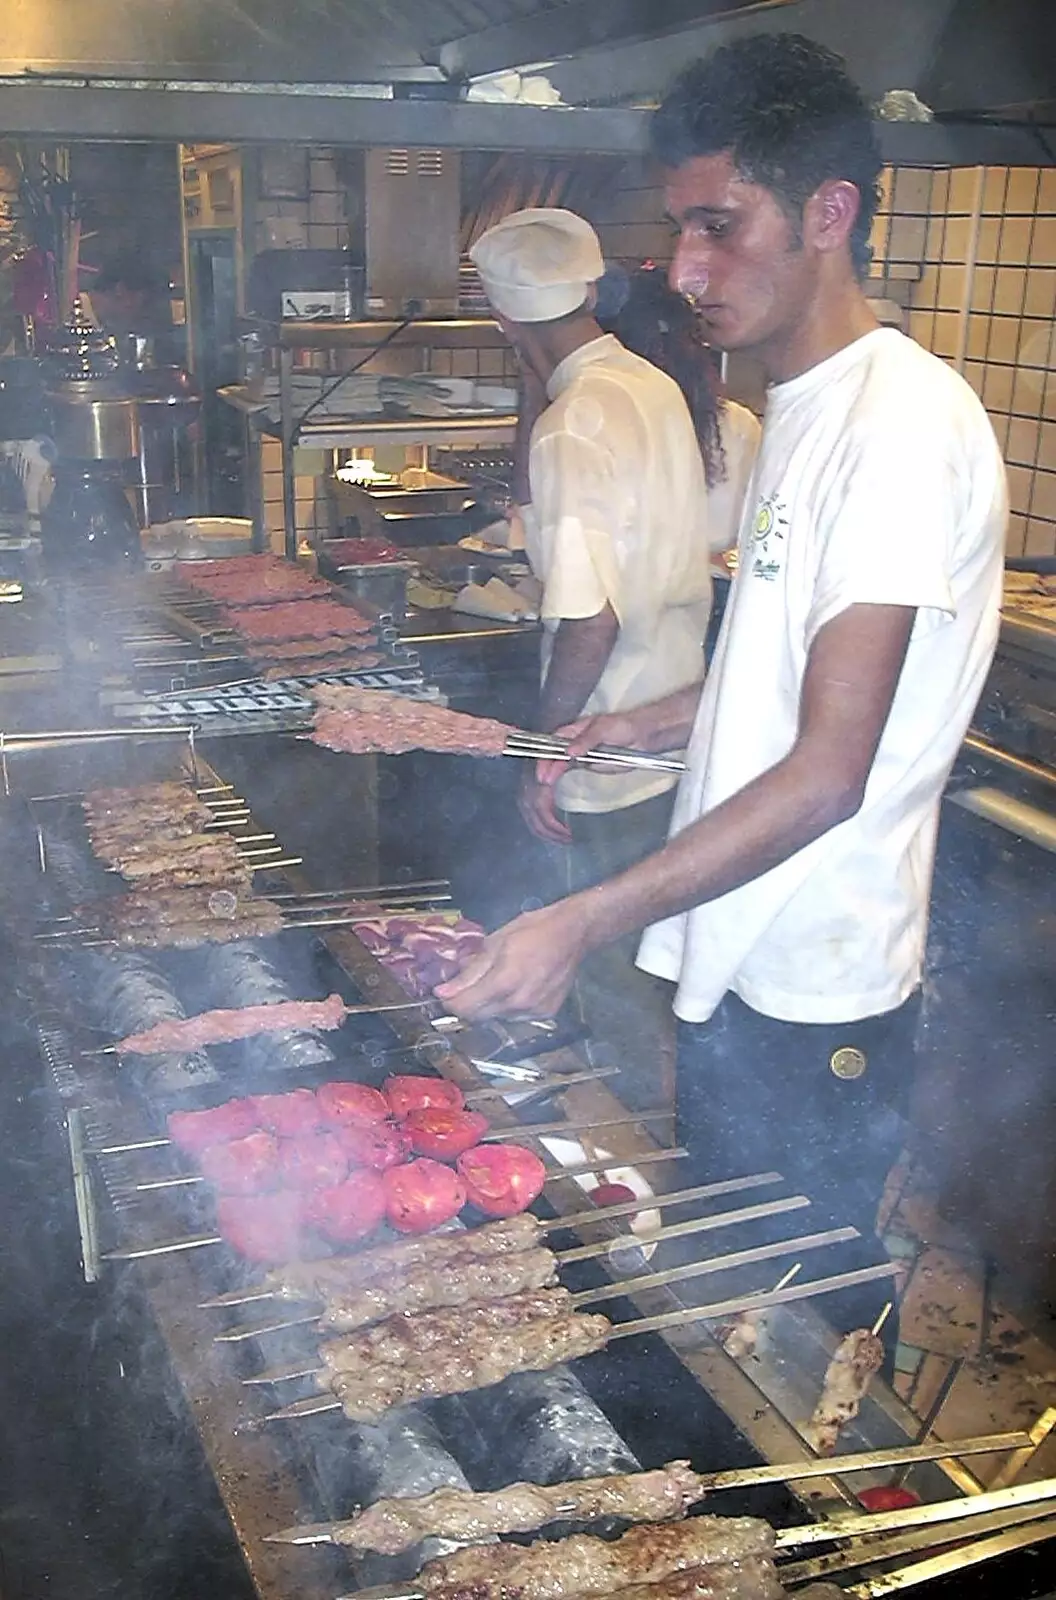 Some dudes grill meat on a stick, from A Postcard From Athens: A Day Trip to the Olympics, Greece - 19th August 2004